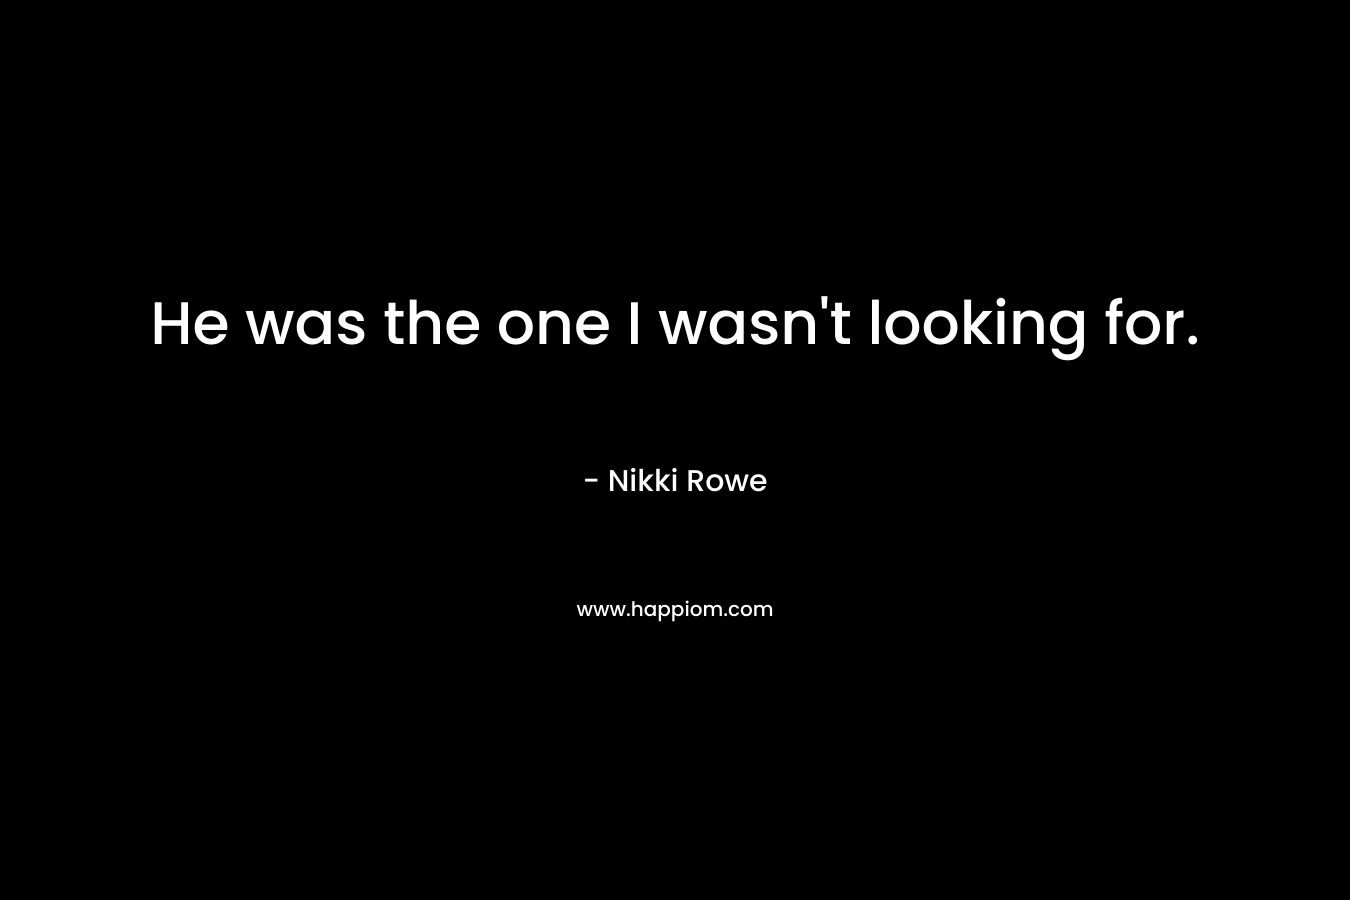 He was the one I wasn’t looking for. – Nikki Rowe